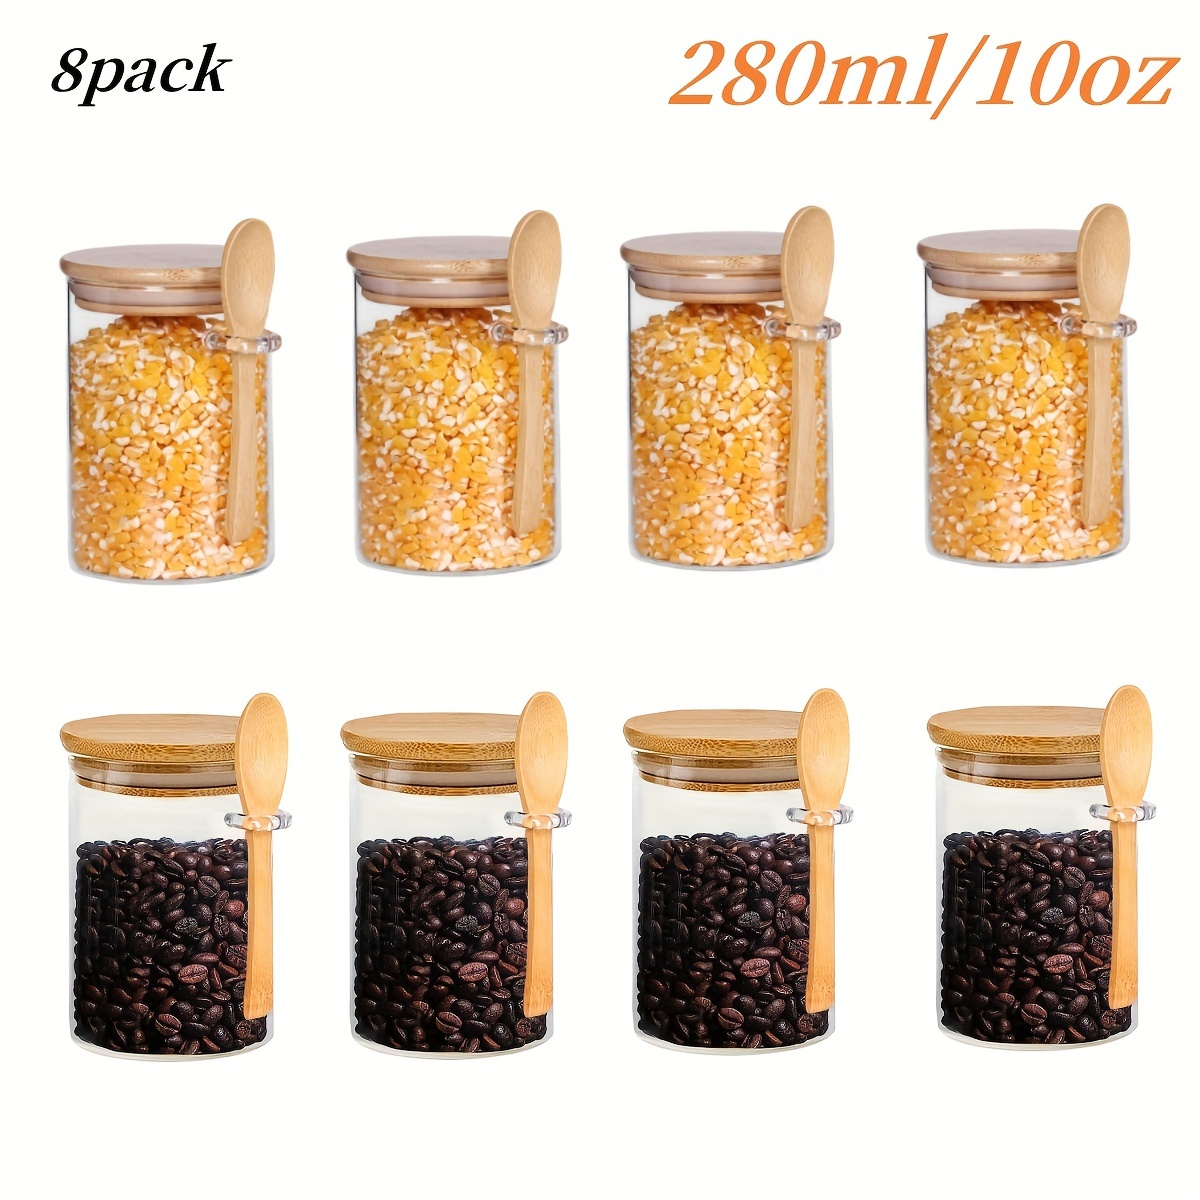 12pcs 8oz Golden Candle Jars With Lids - Bulk Candle Jars For Making  Candles, Arts And Crafts, Storage, Gifts And More - Empty Candle Jars With  Lids